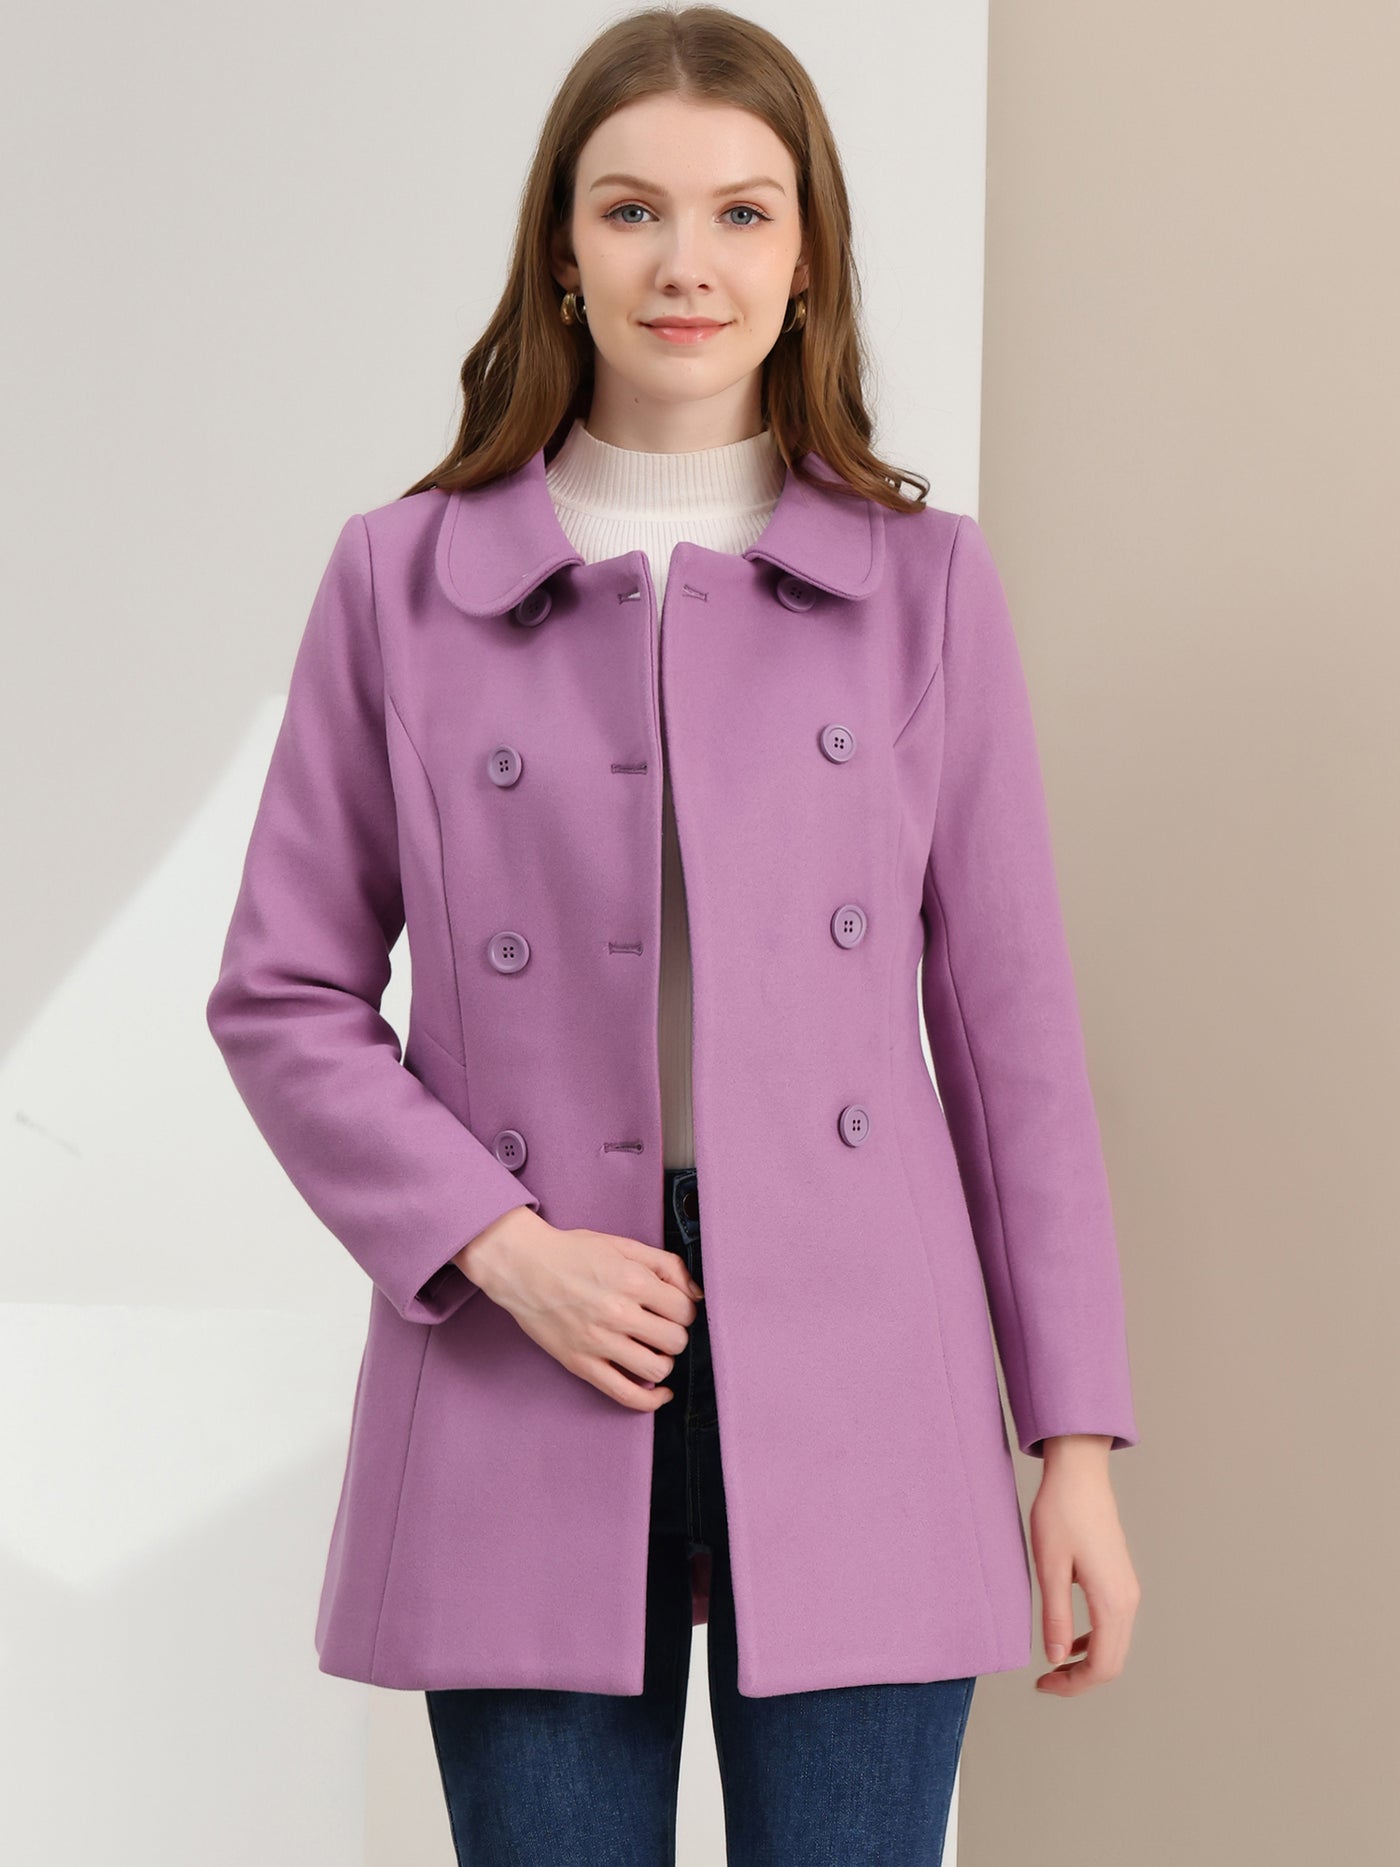 Allegra K Peter Pan Collar Double Breasted Winter Long Trench Pea Coat